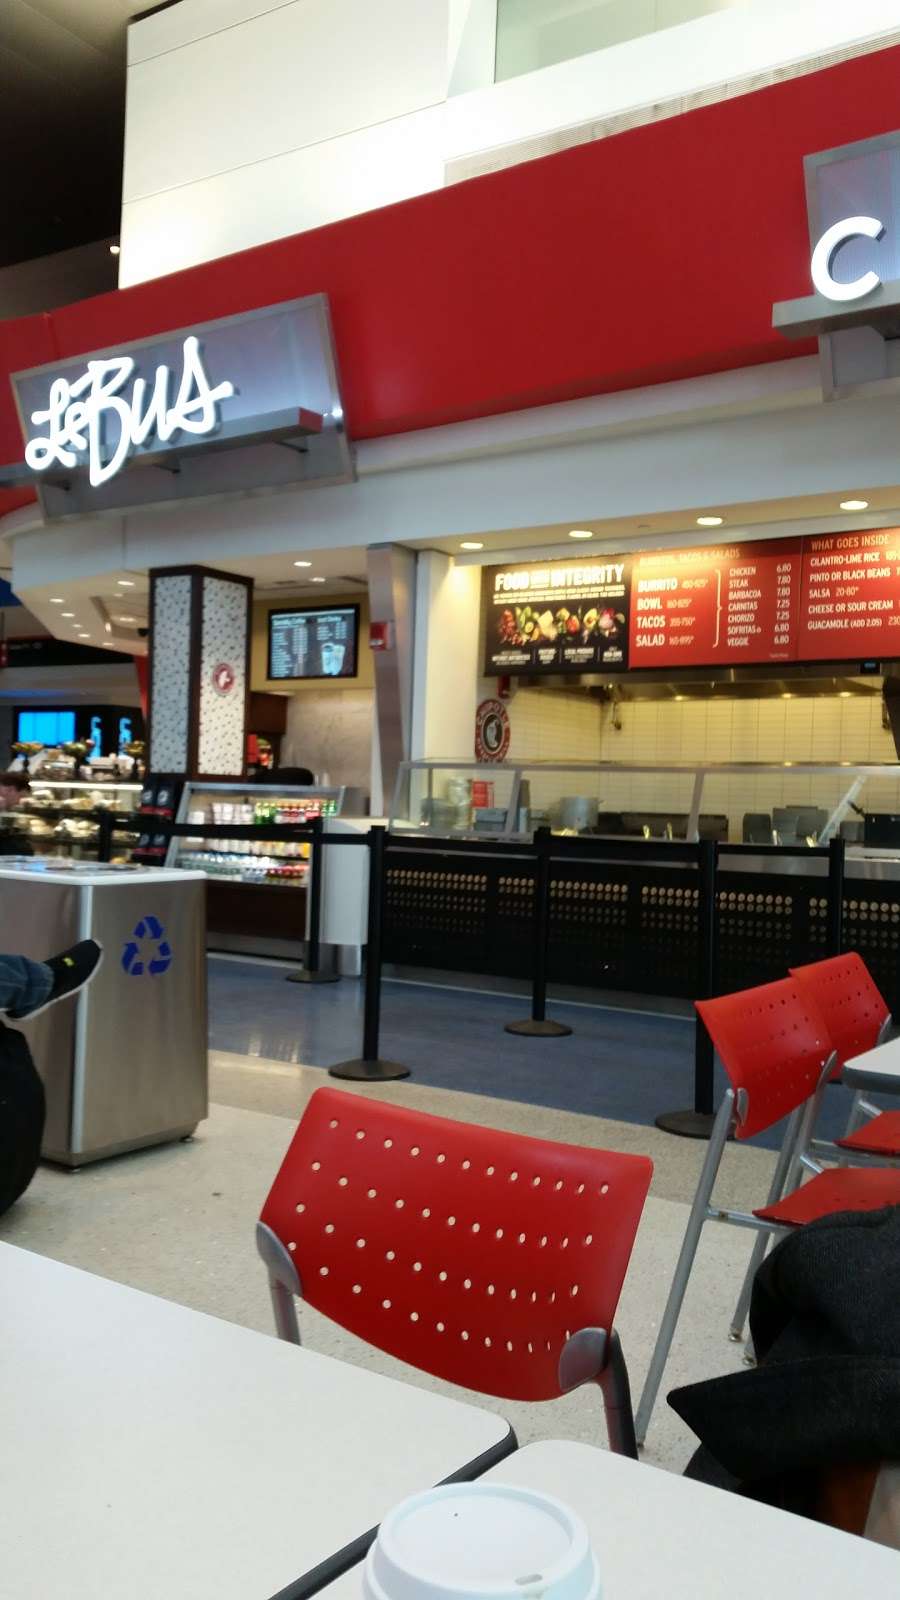 Le Bus Airport Cafe | Terminal F Food Court, Departures Rd, Philadelphia, PA 19153, USA | Phone: (215) 478-2843